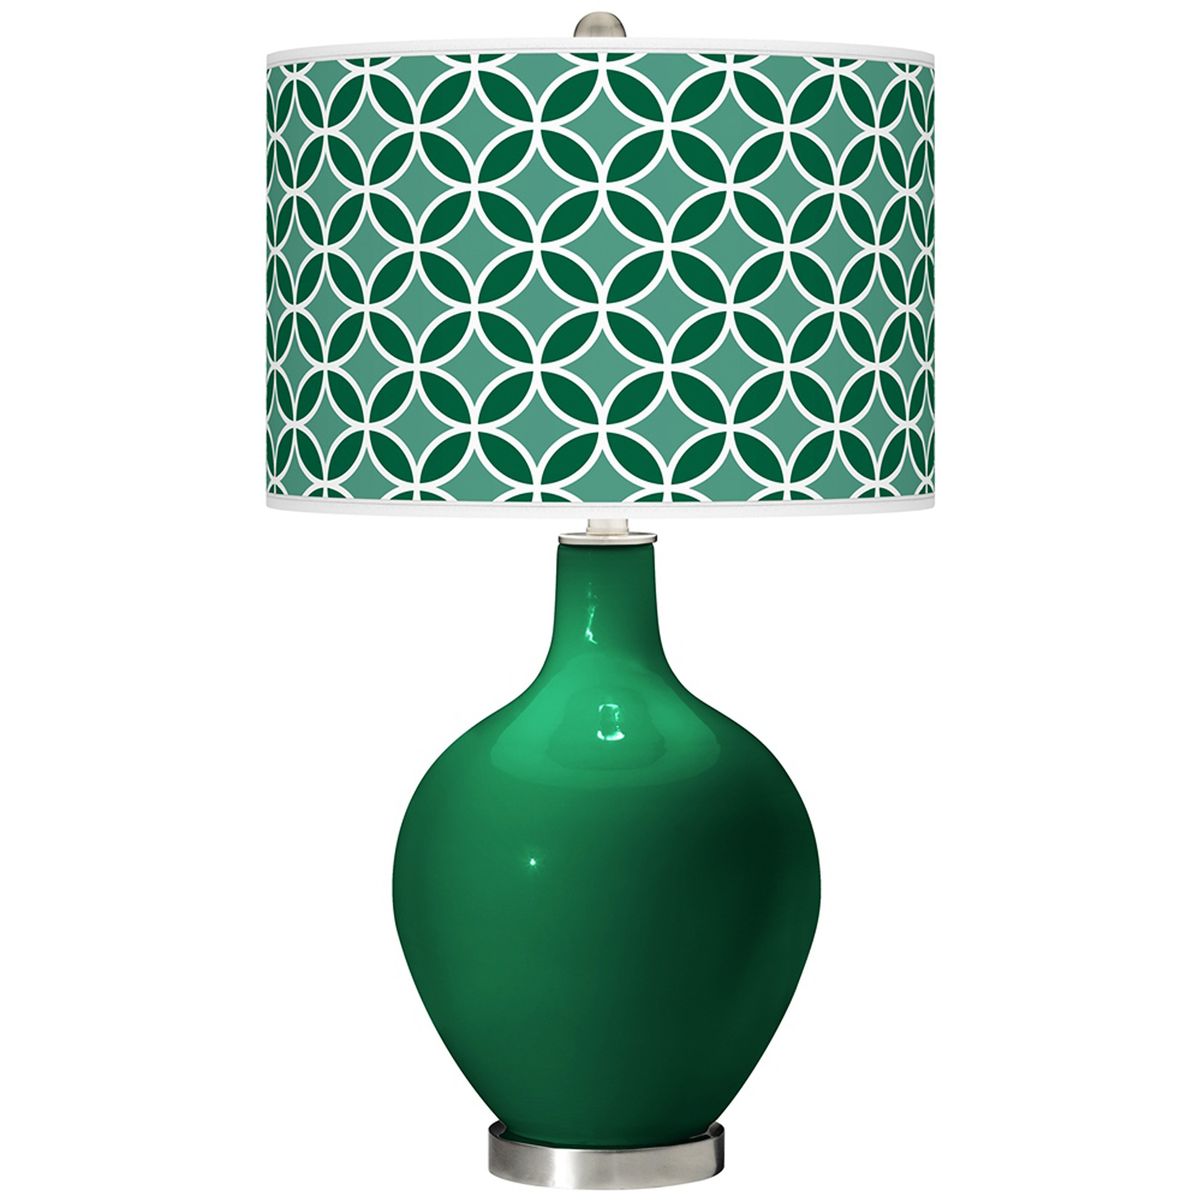 At right: The Greens Circle Rings Ovo table lamp, a smart, contemporary emerald green accent in a home (www.lampsplus.com).